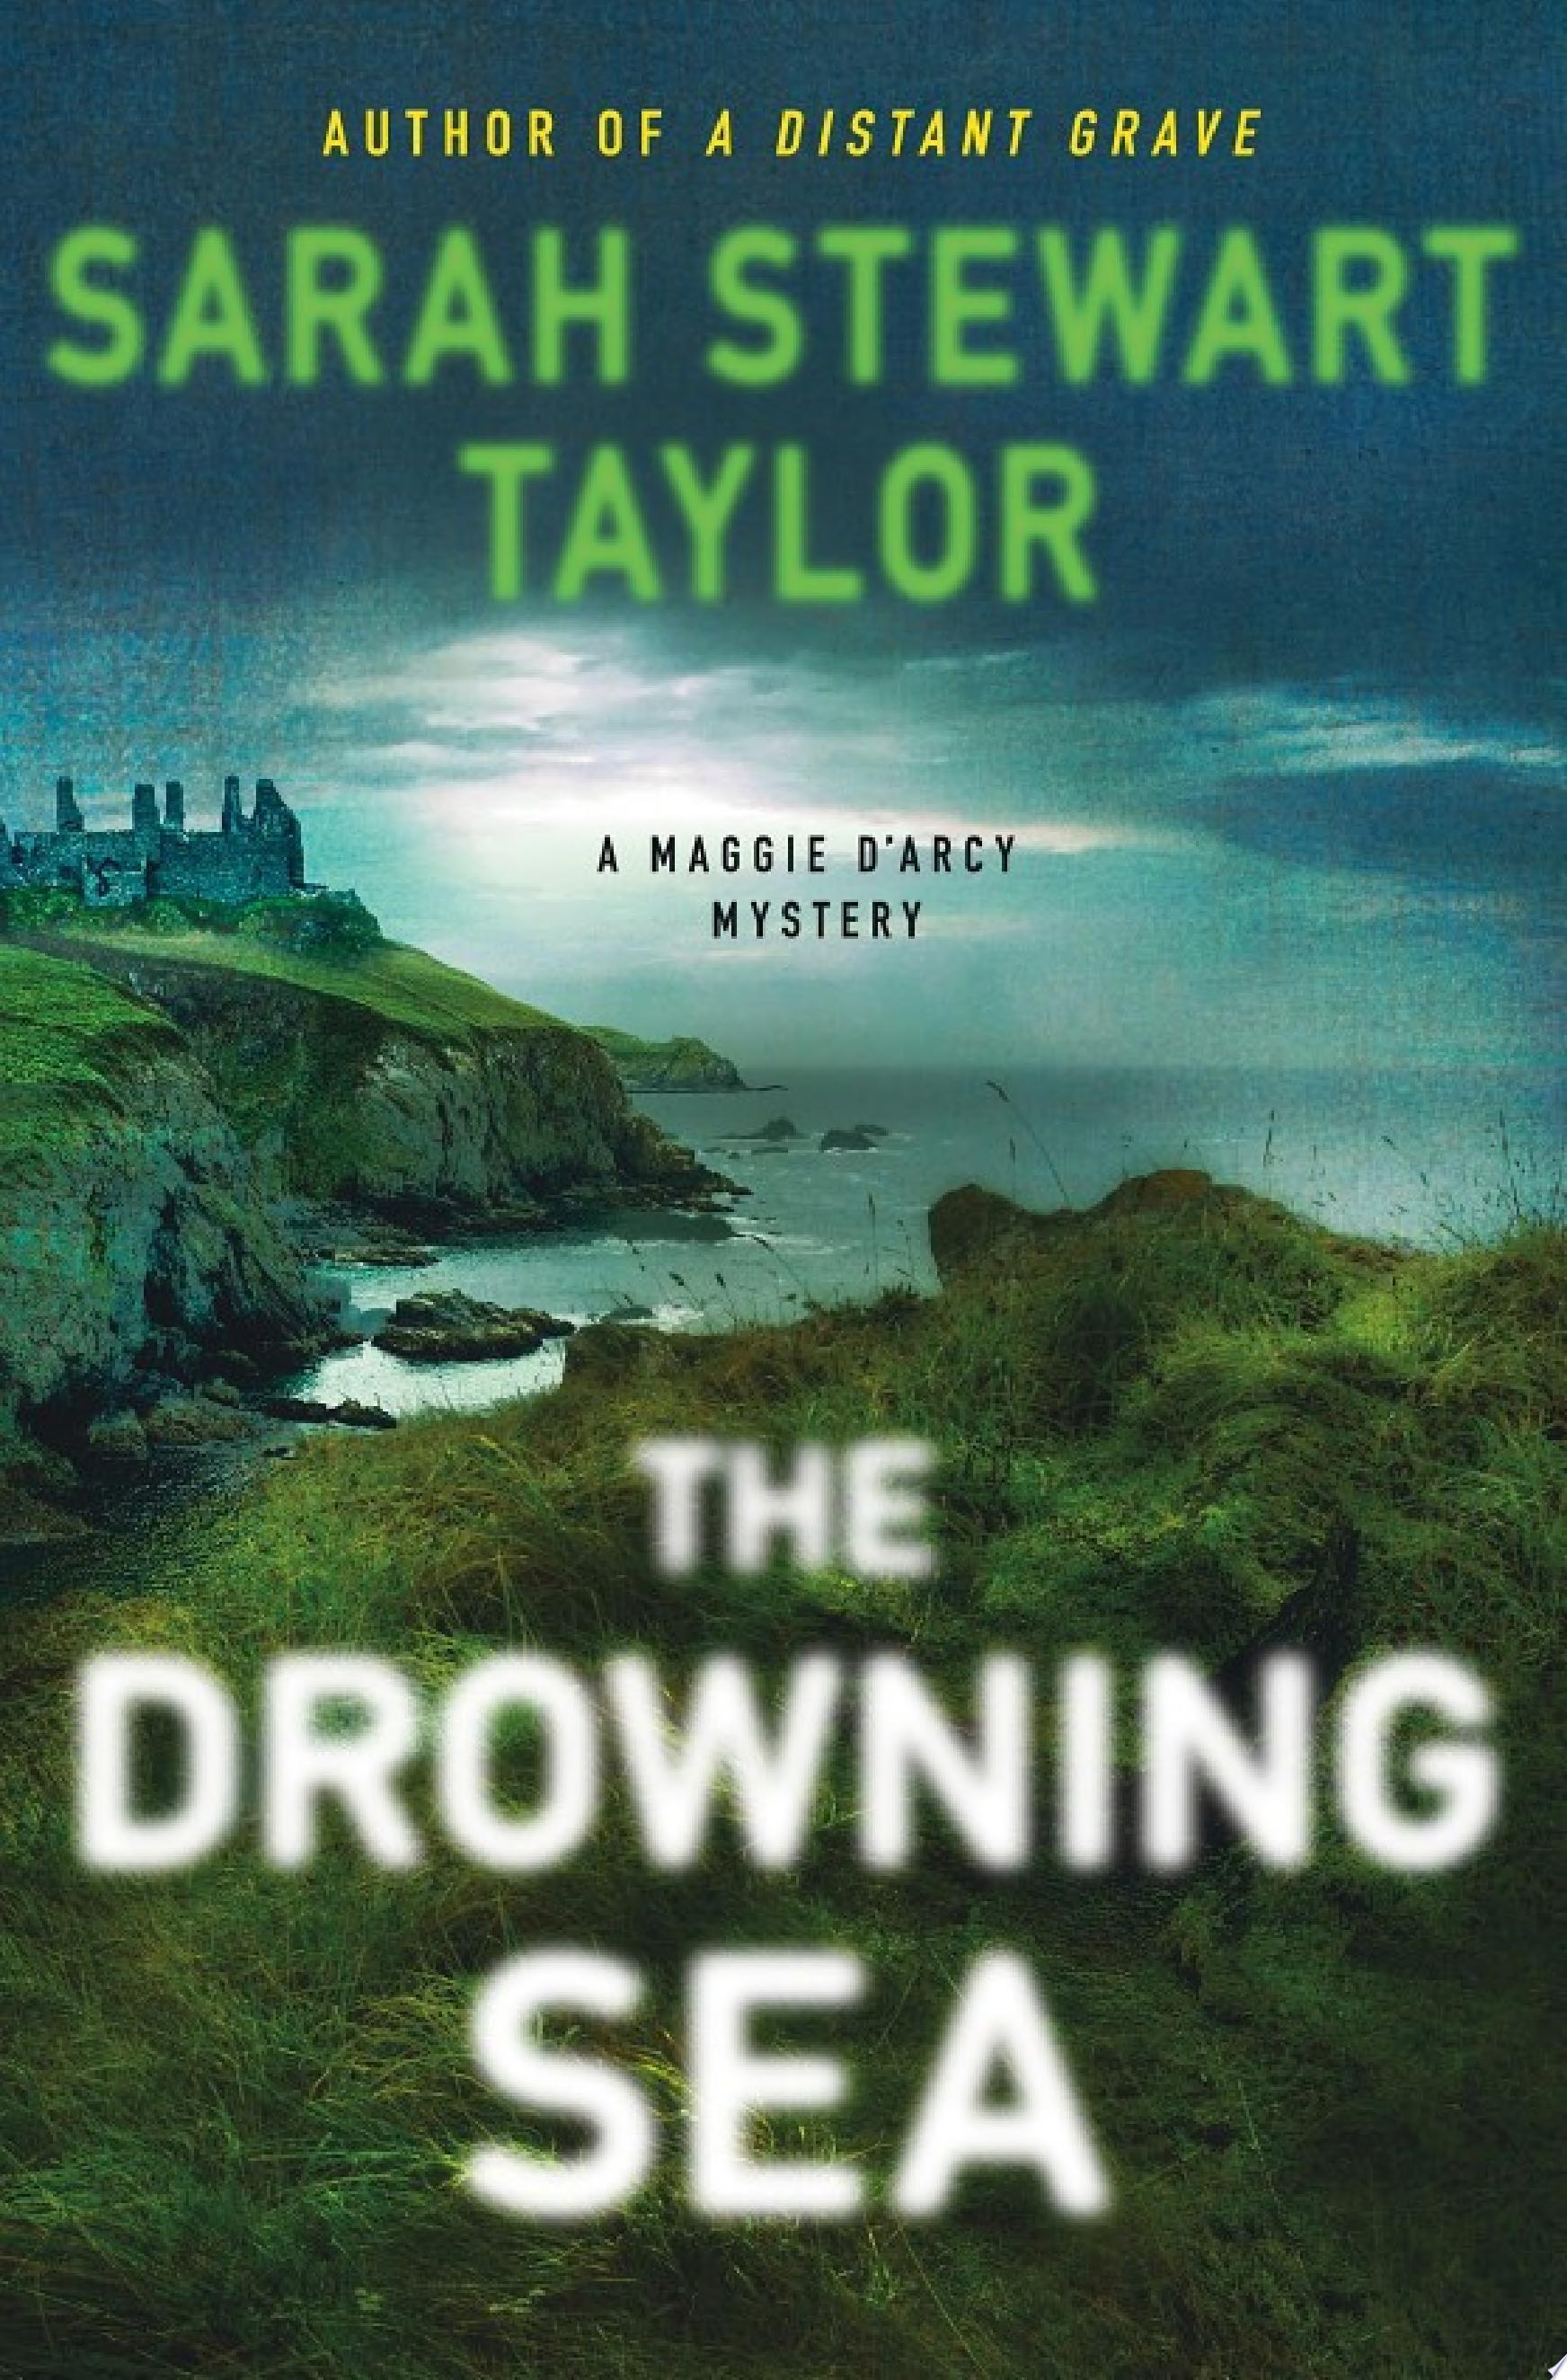 Image for "The Drowning Sea"